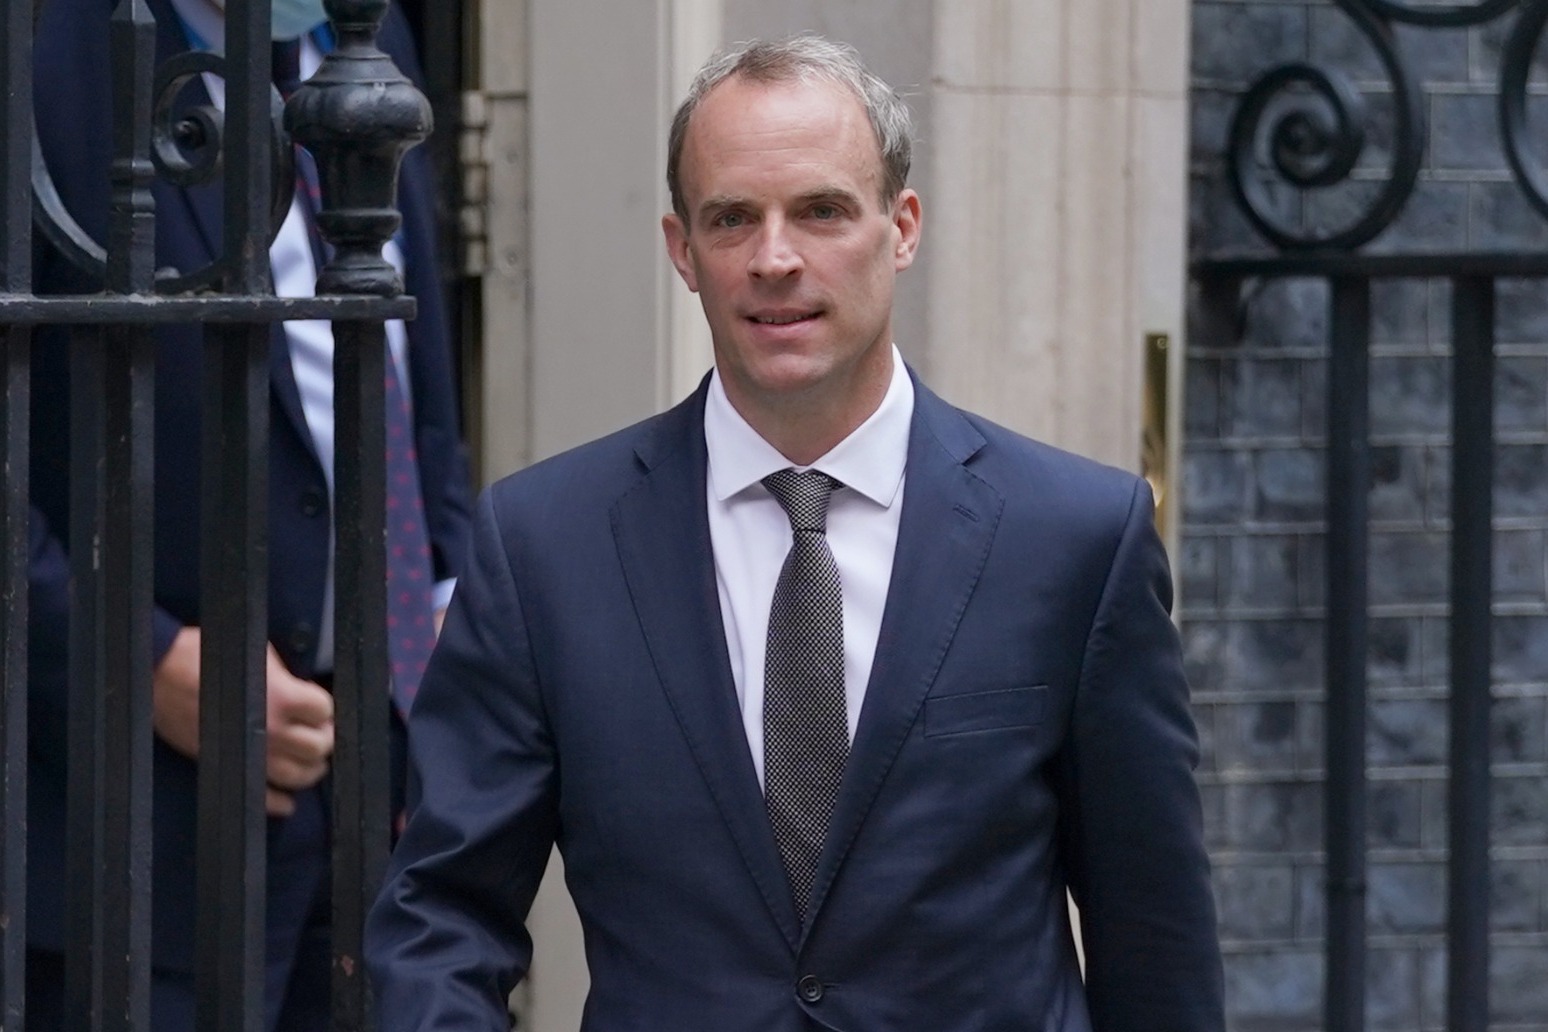 Raab chairs G7 ministers meeting as opposition calls for him to resign 